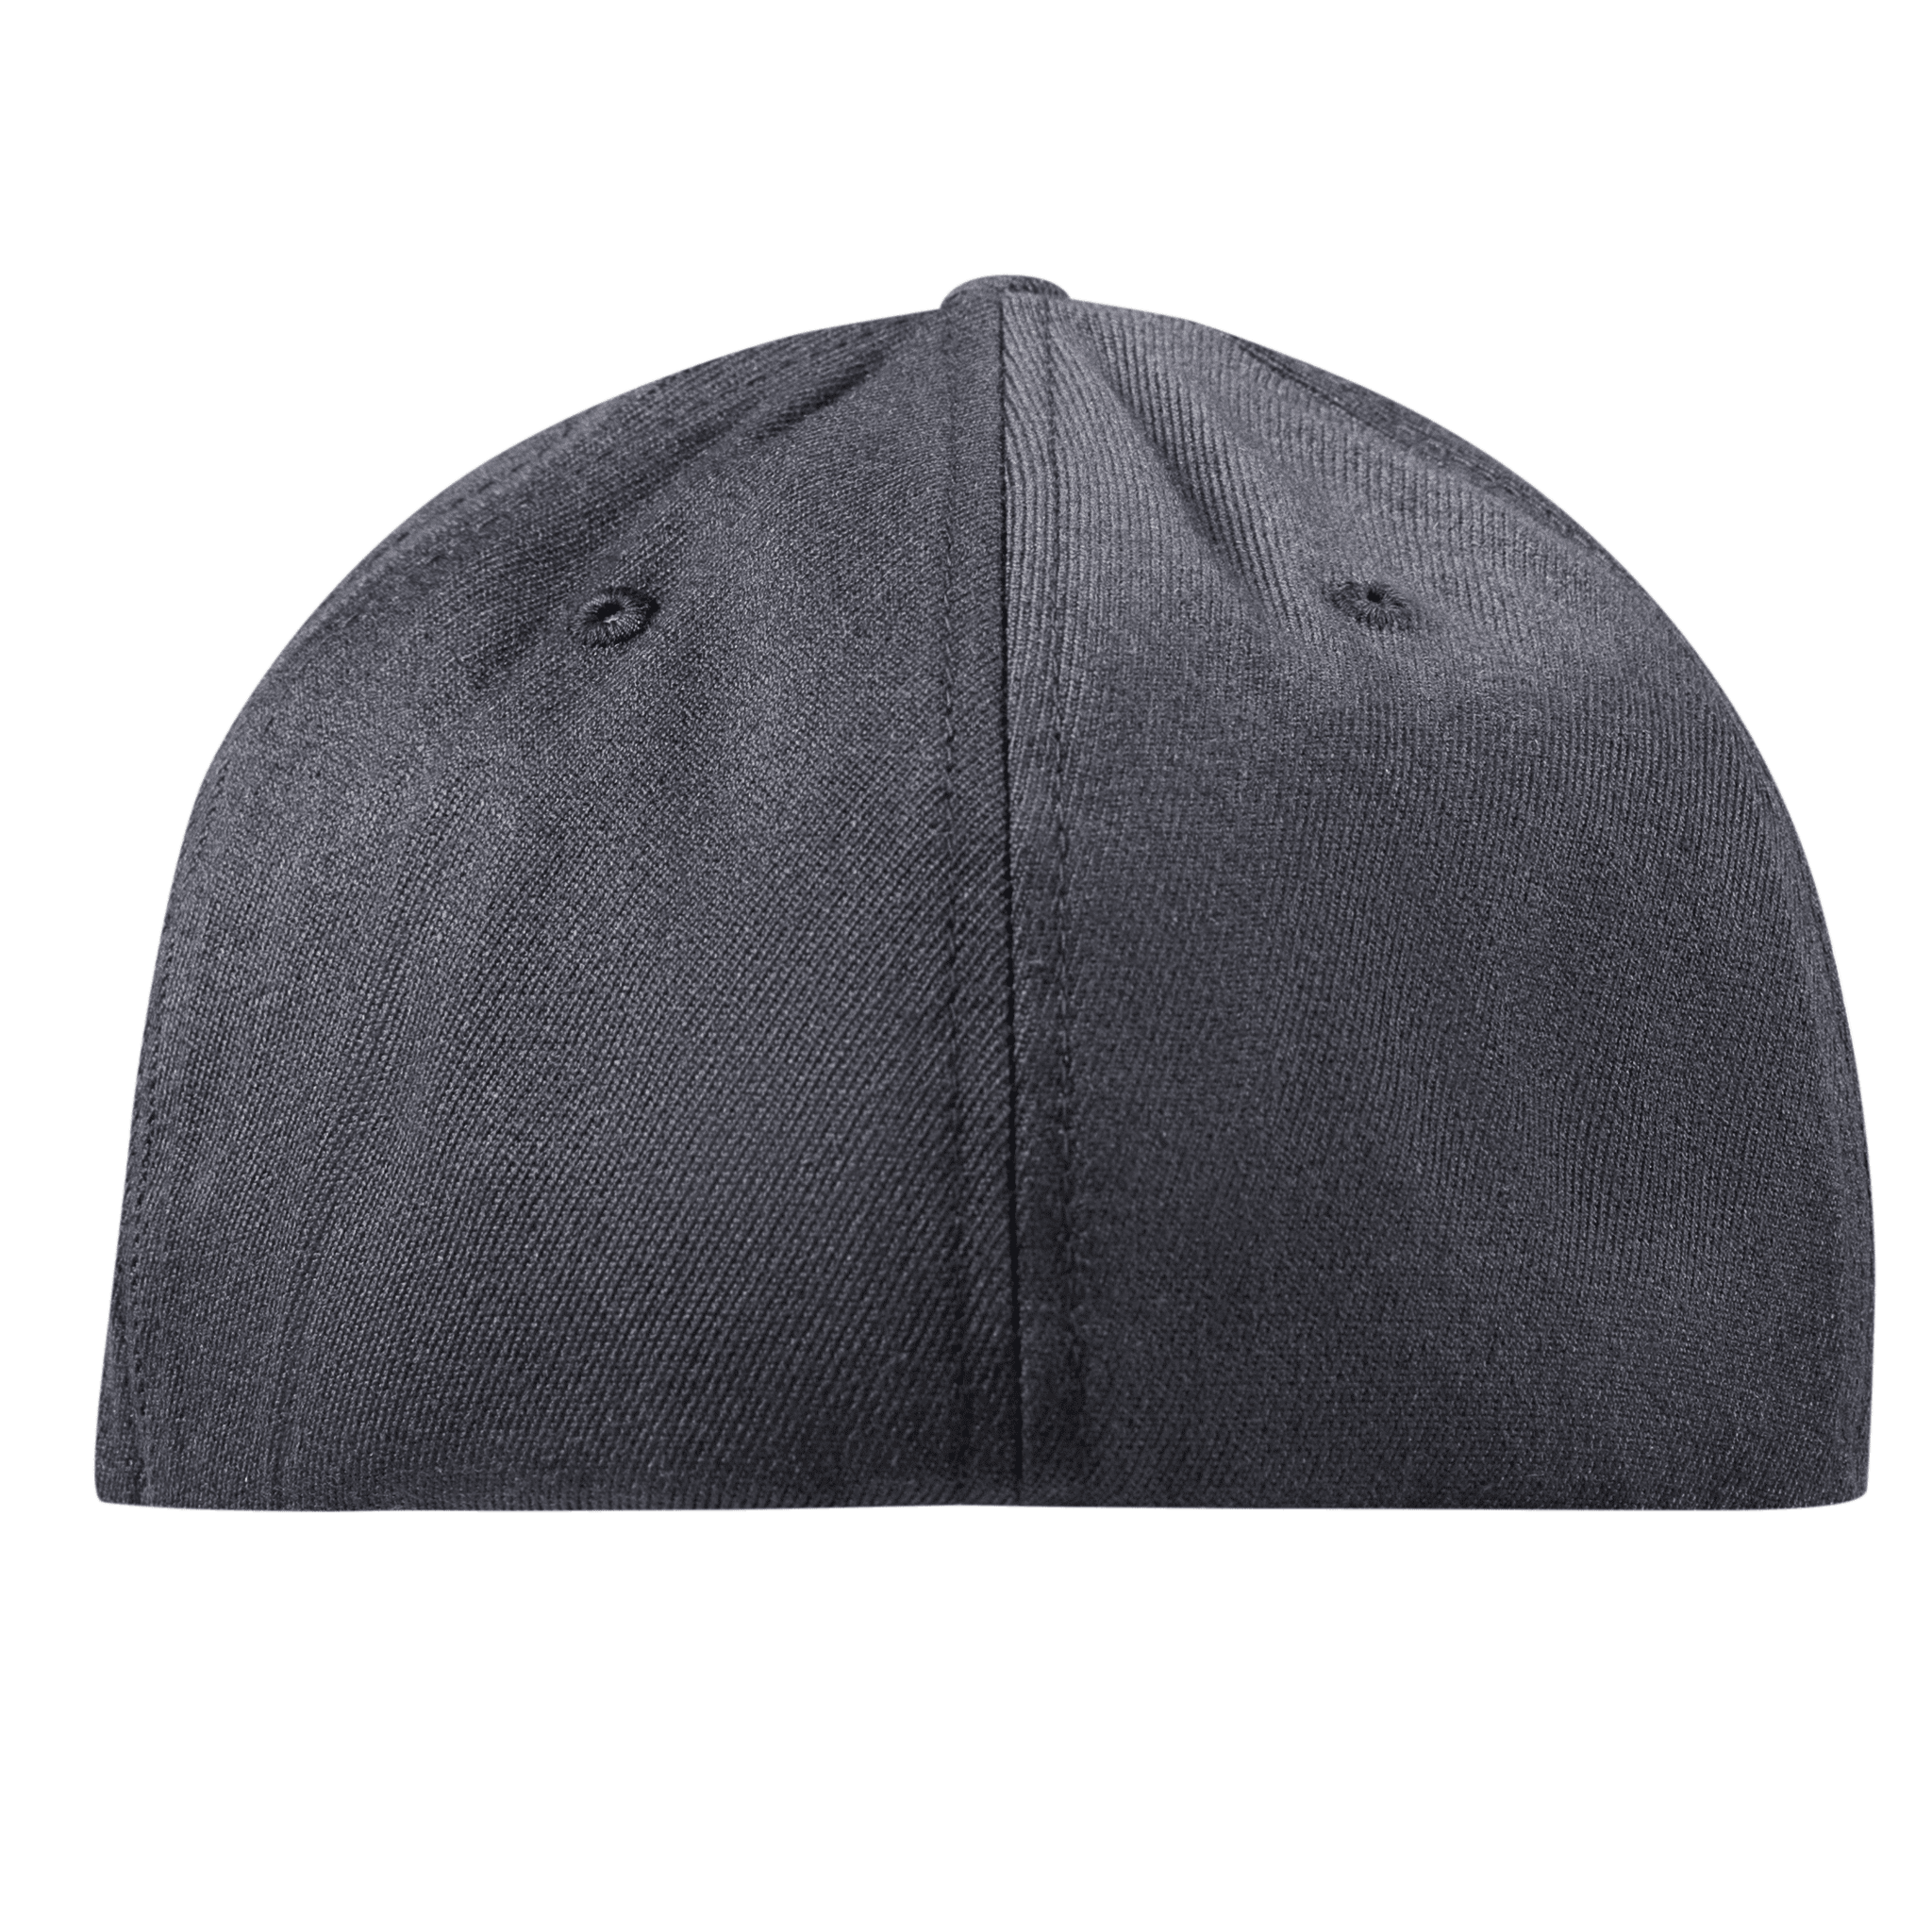 California 31 Midnight Flexfit Fitted Back Charcoal